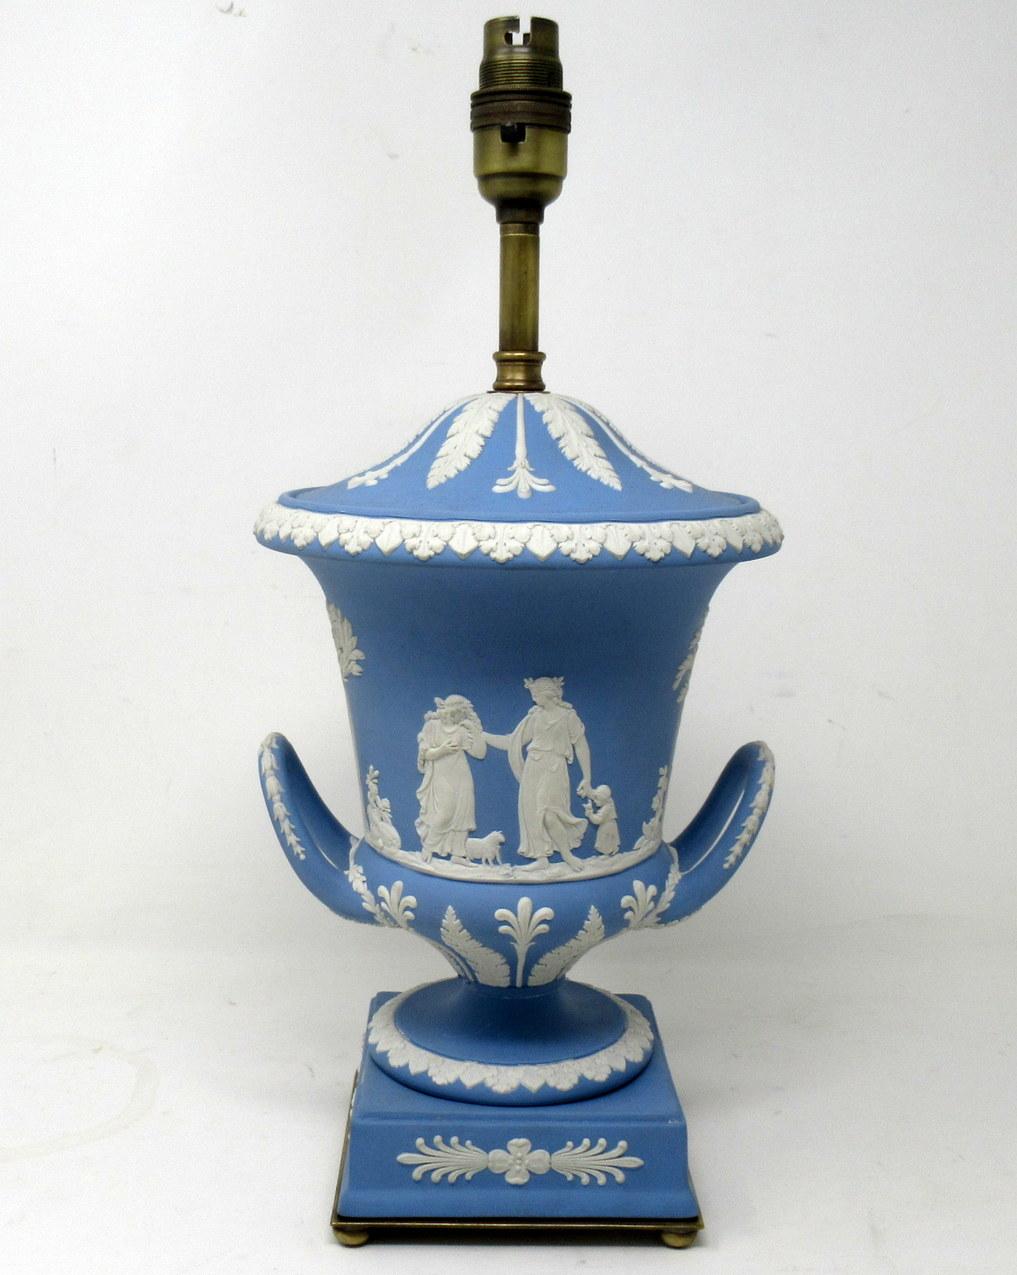 An exceptionally fine example of a Single English Jasperware Wedgwood Urn of good size proportions, now converted to an electric table lamp. Mid twentieth century. 

The twin arched handle Campana form urn decorated in relief depicting